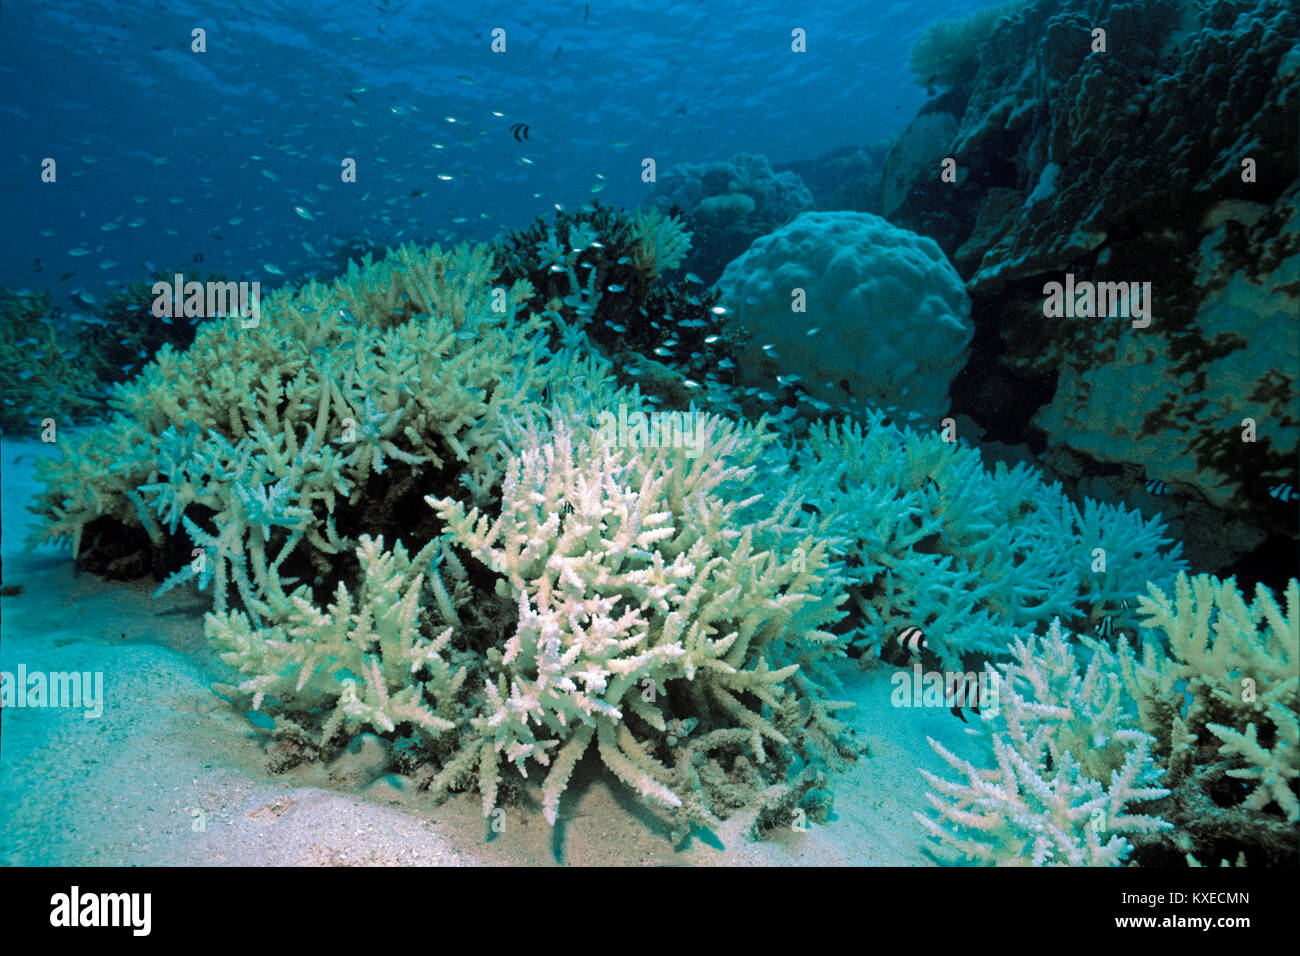 Bleached staghorn corals, coral bleaching, consequences of global warming, coral reef at Maldives islands, Indian ocean, Asia Stock Photo